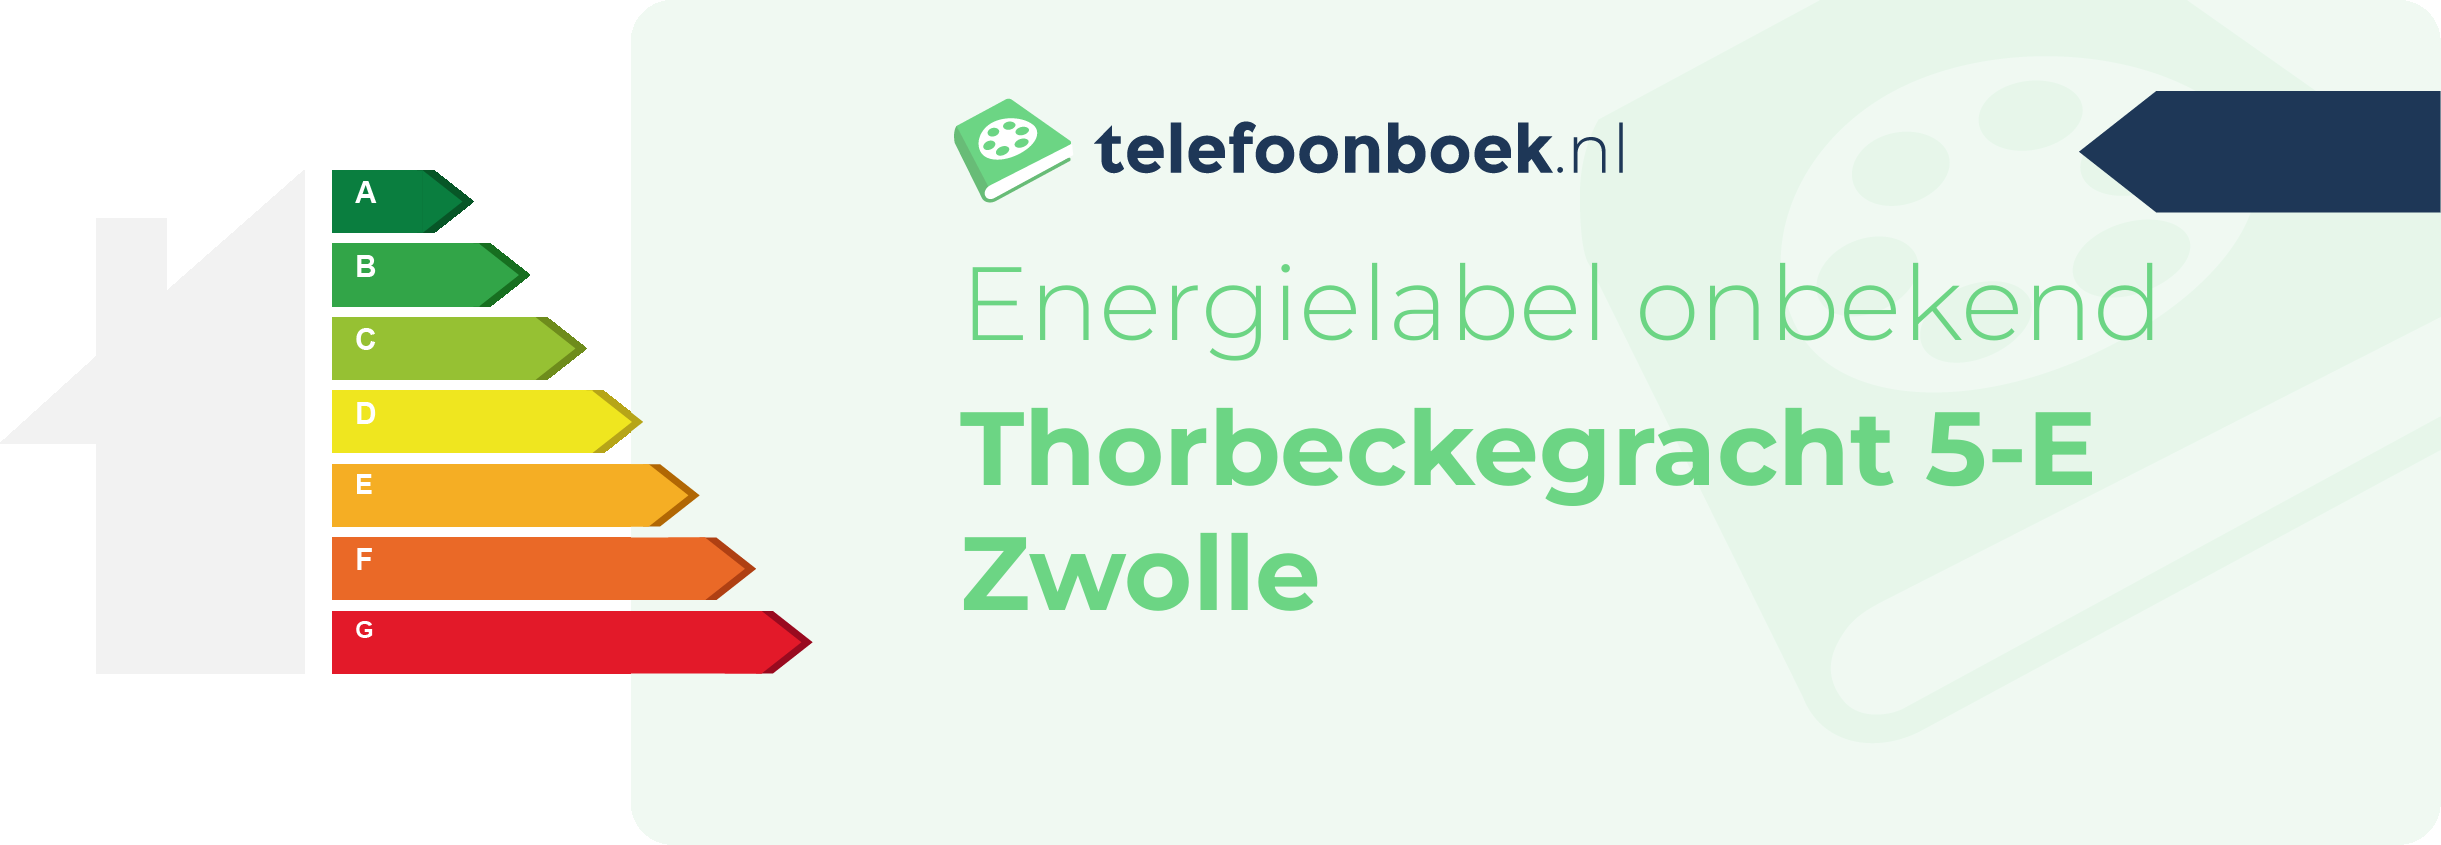 Energielabel Thorbeckegracht 5-E Zwolle